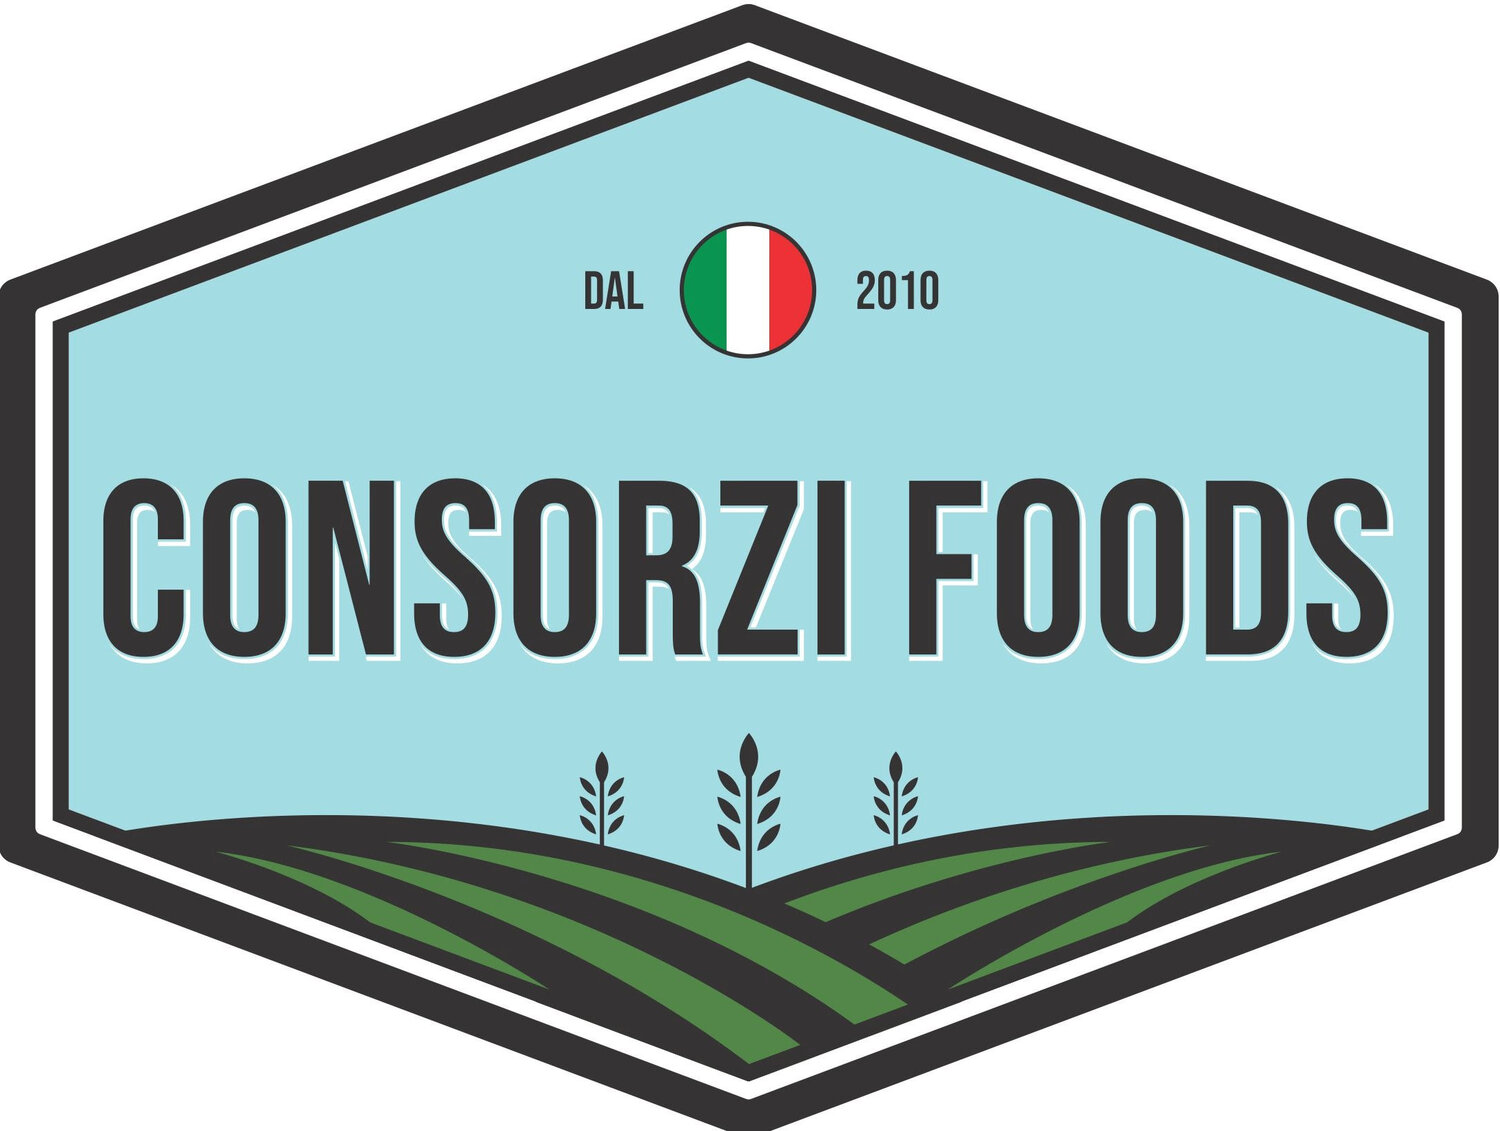 Consorzi Foods — Your Private Label Partner